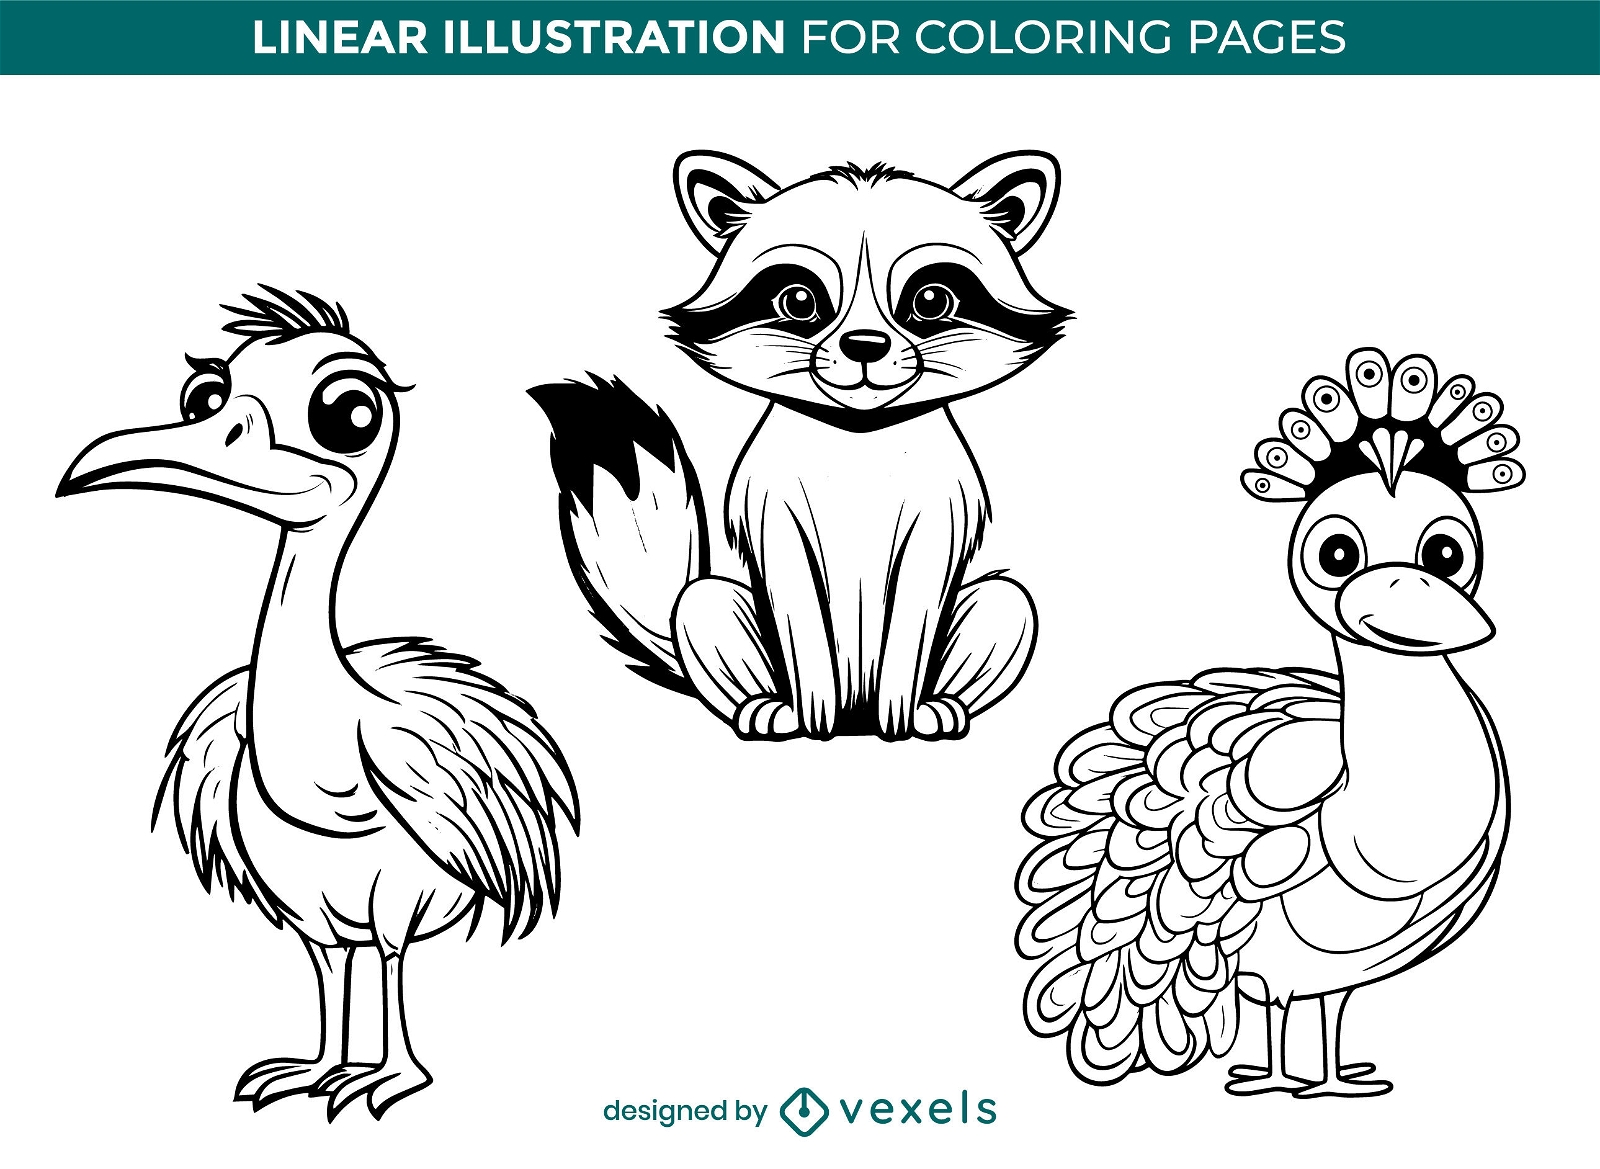 Cute hand-drawn animals coloring book pages design